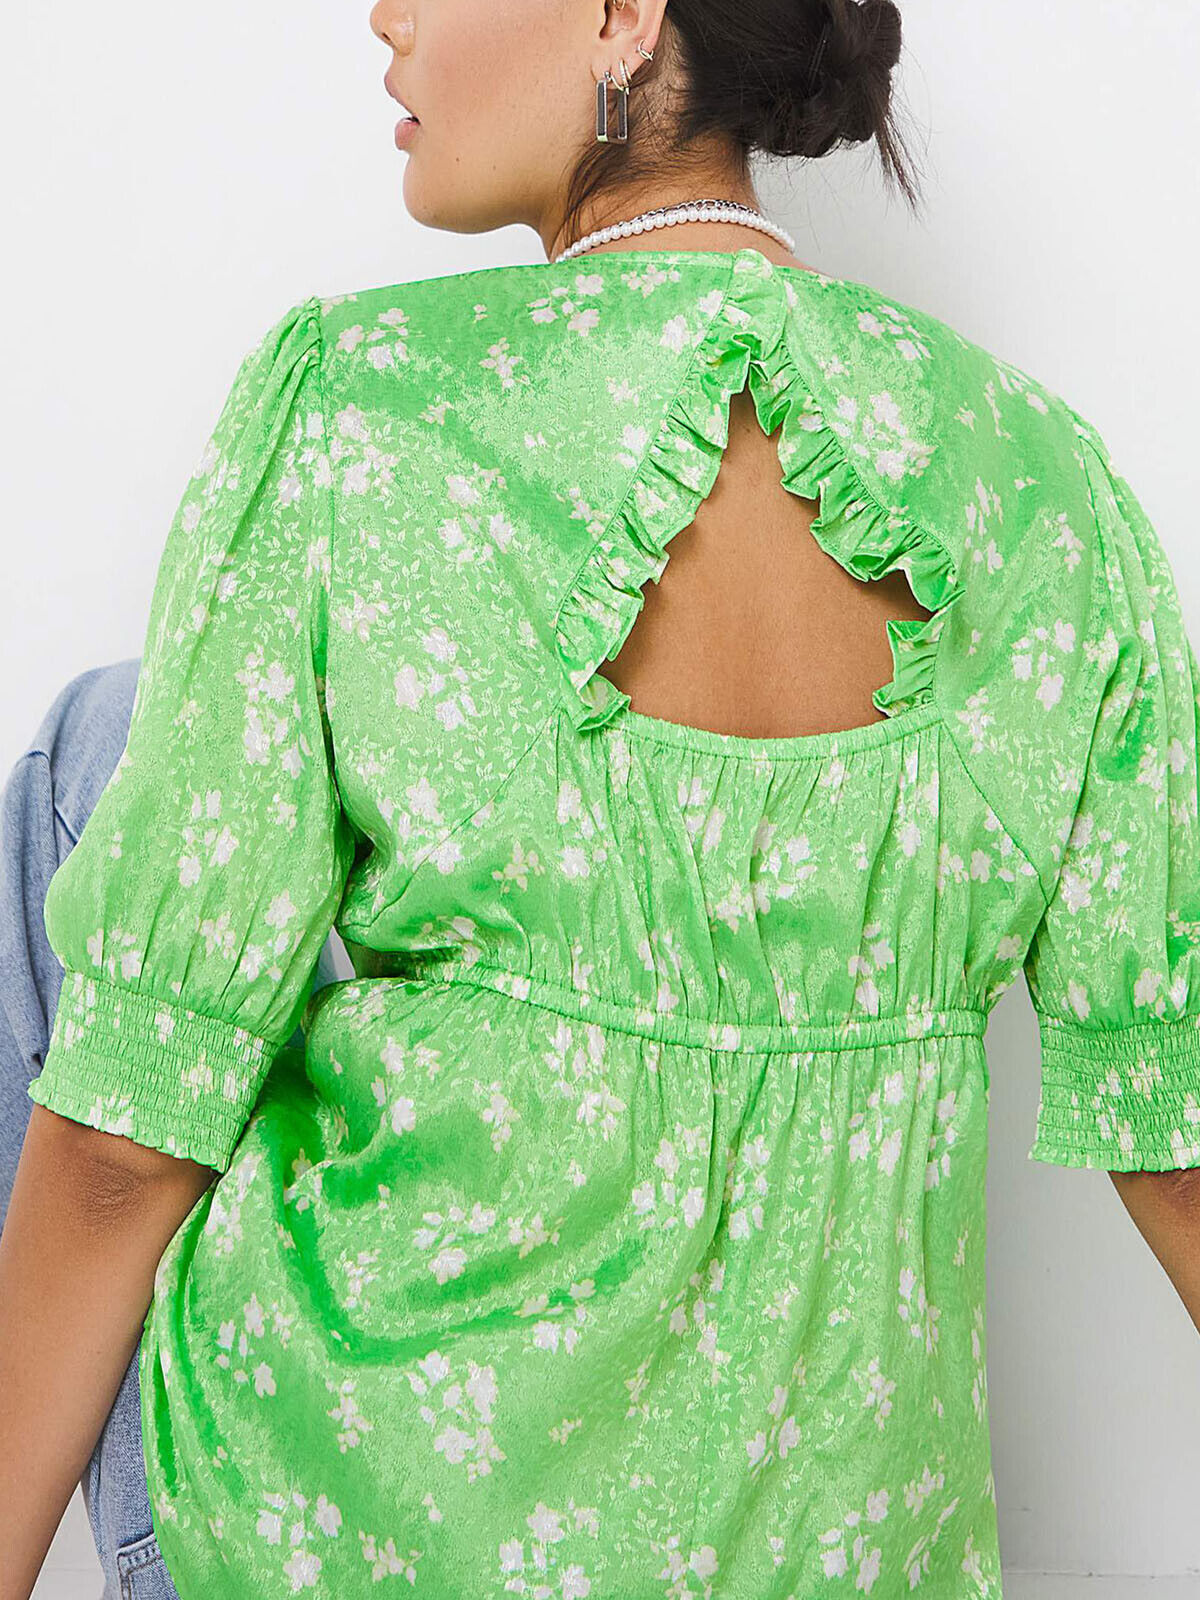 Simply Be Green Satin Jacquard Cut Out Back Blouse in Sizes 20, 26, 28, 32